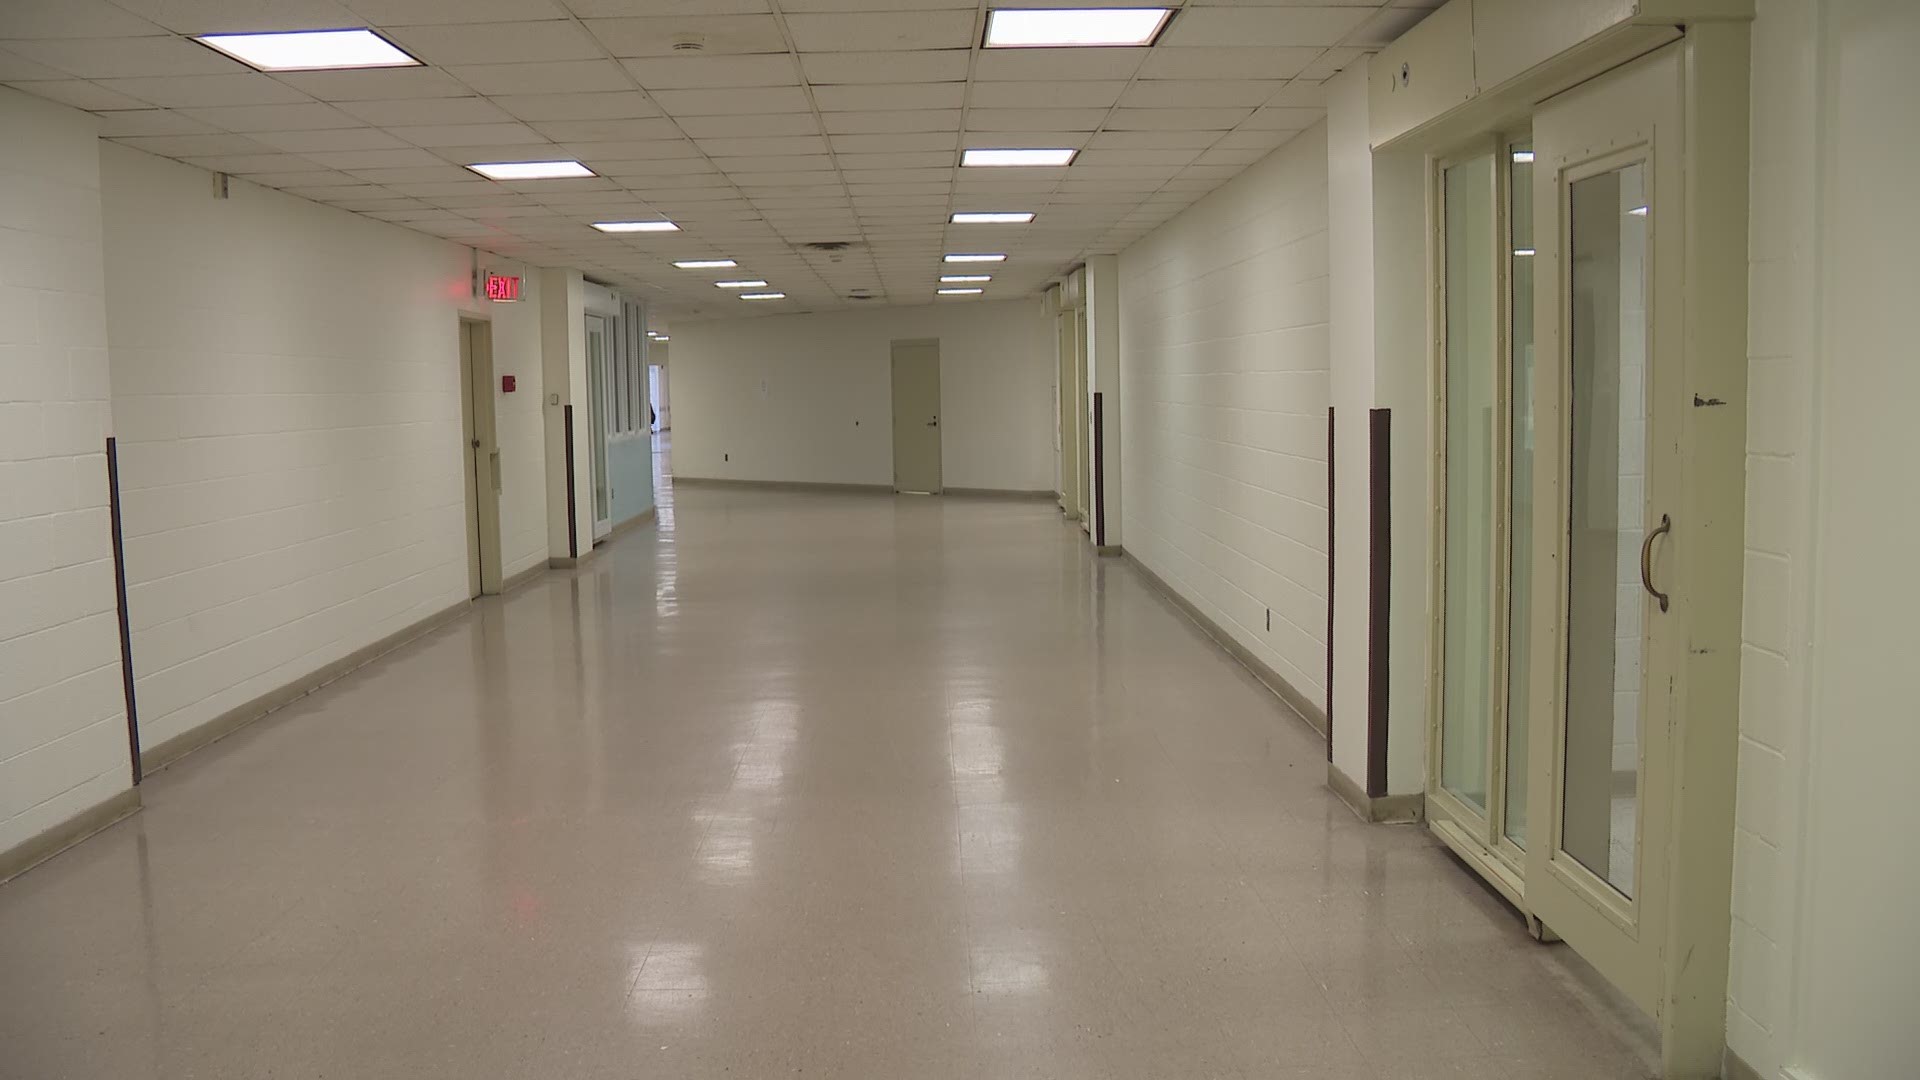 The revelation of poor conditions at the facility has led to a massive scandal. 3News' Andrew Horansky and other reporters toured the building Thursday.